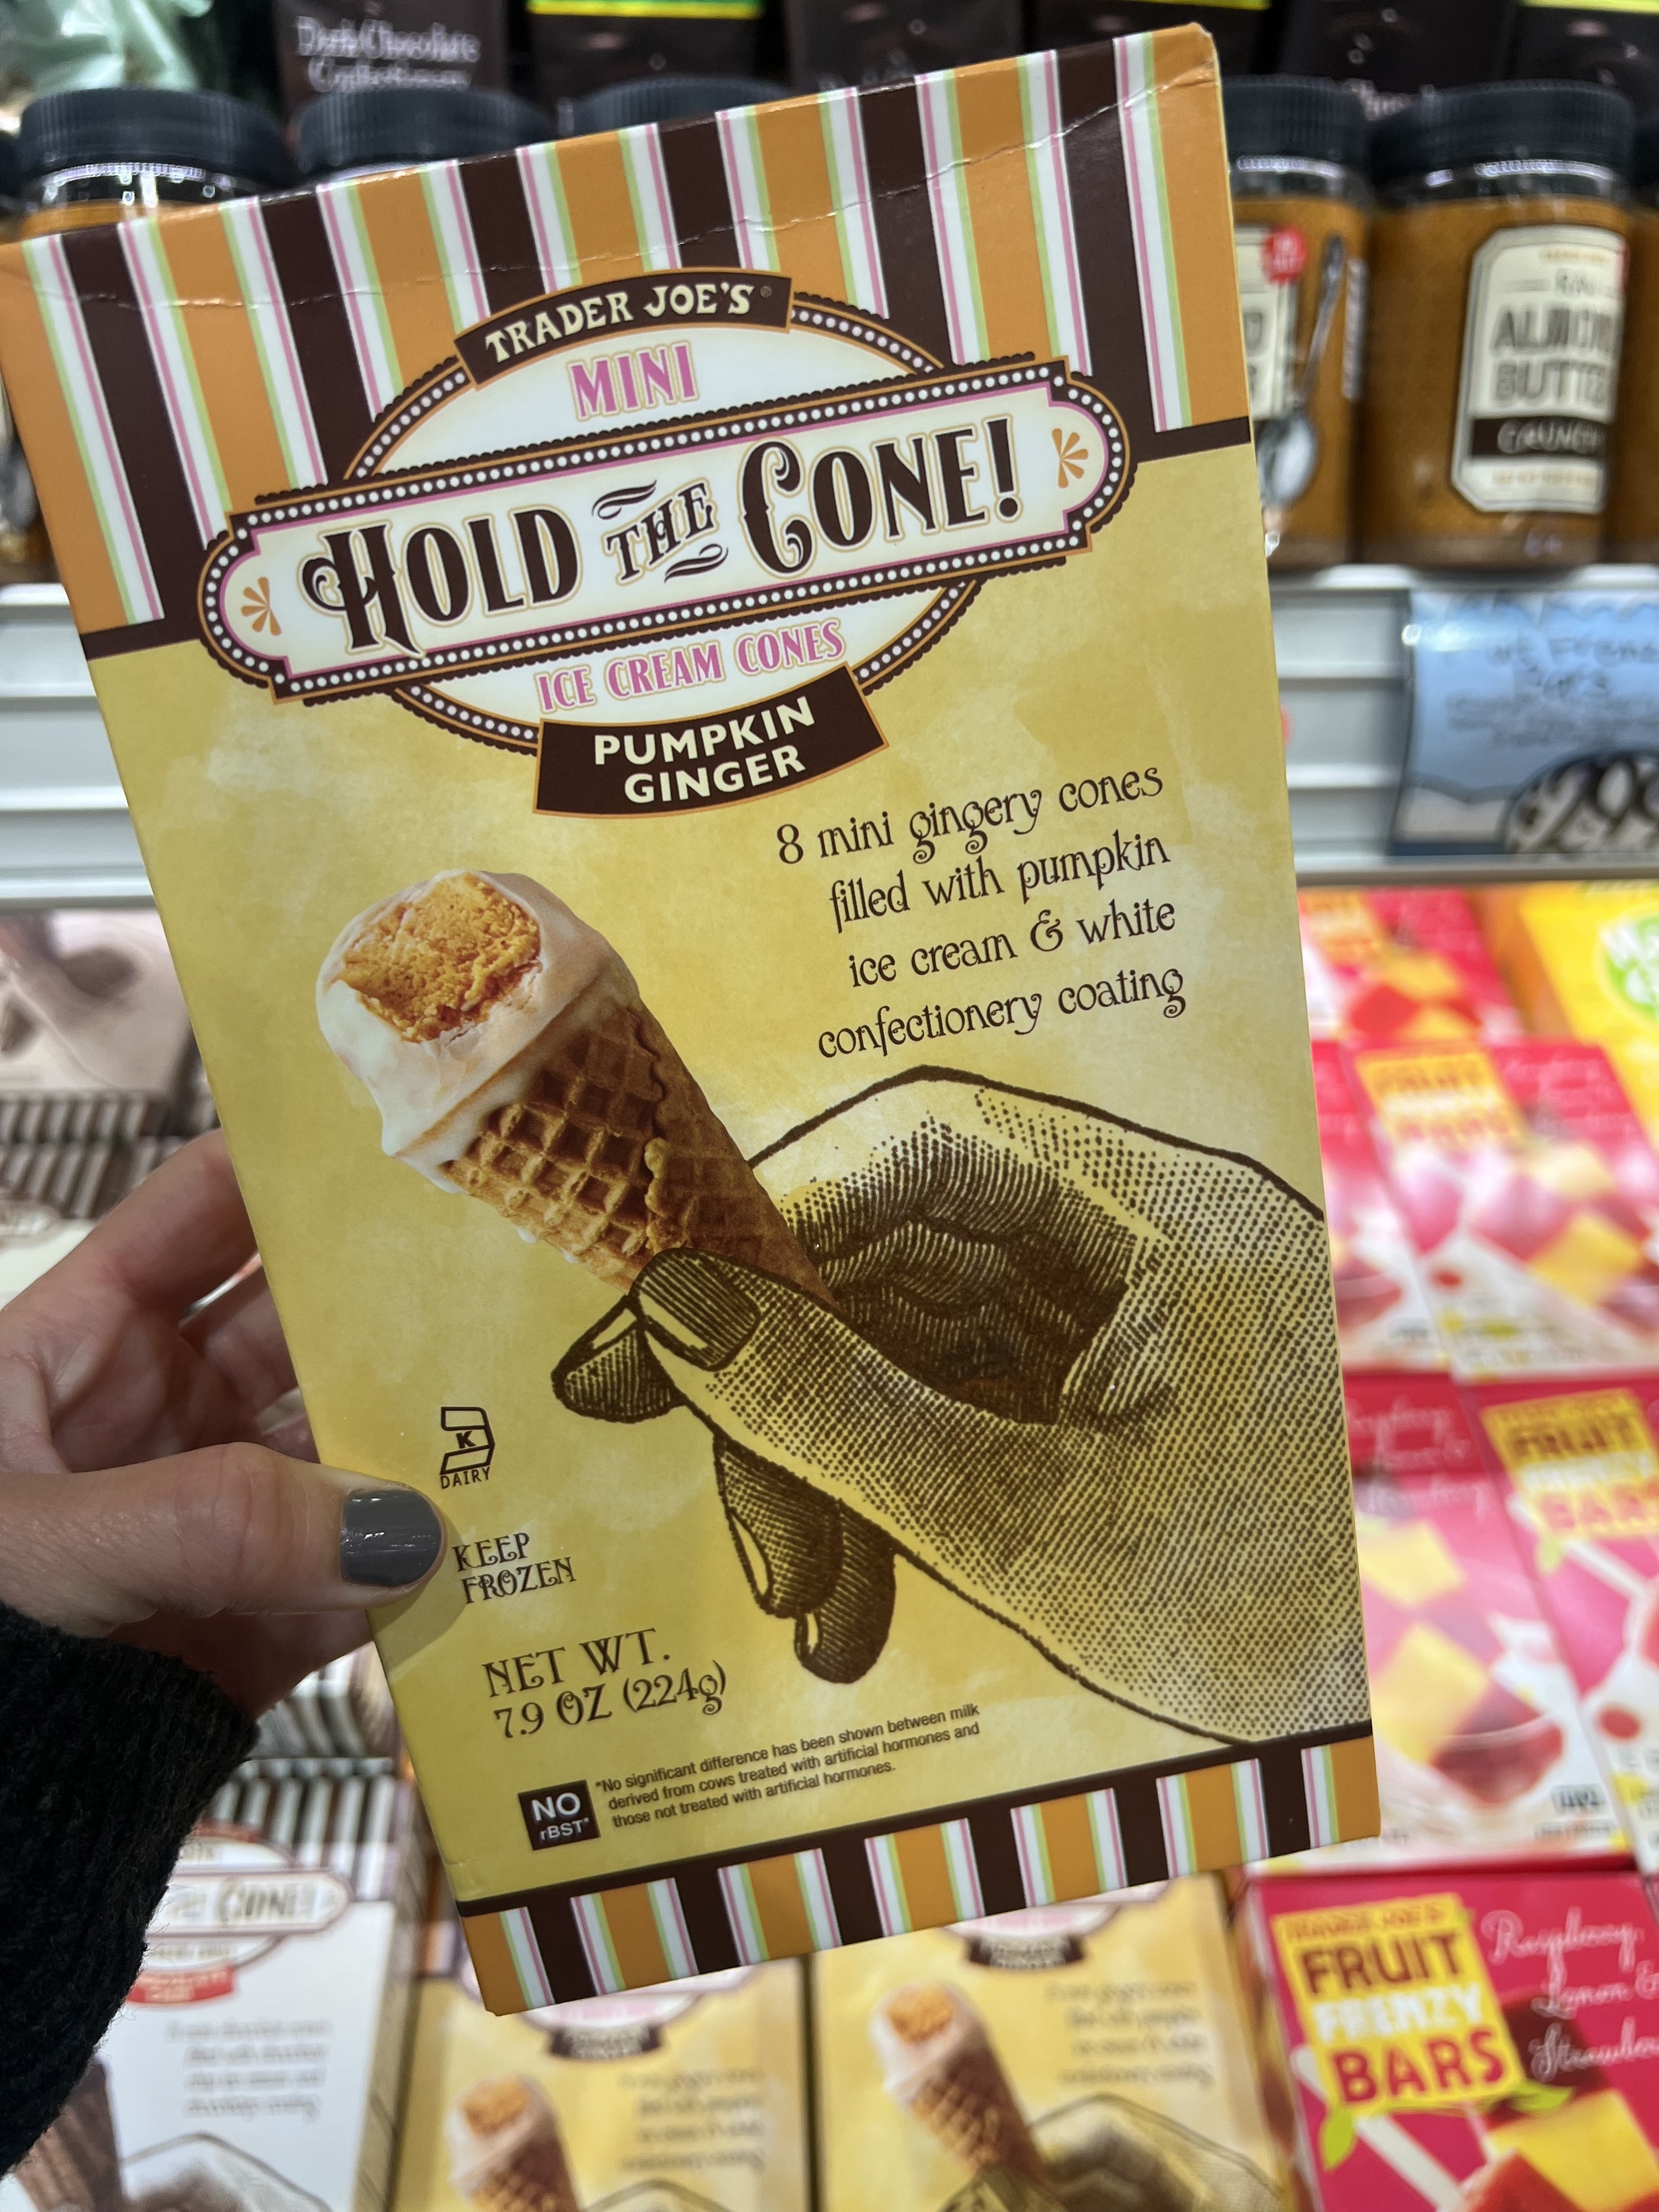 A box of Pumpkin Ginger Hold The Cone